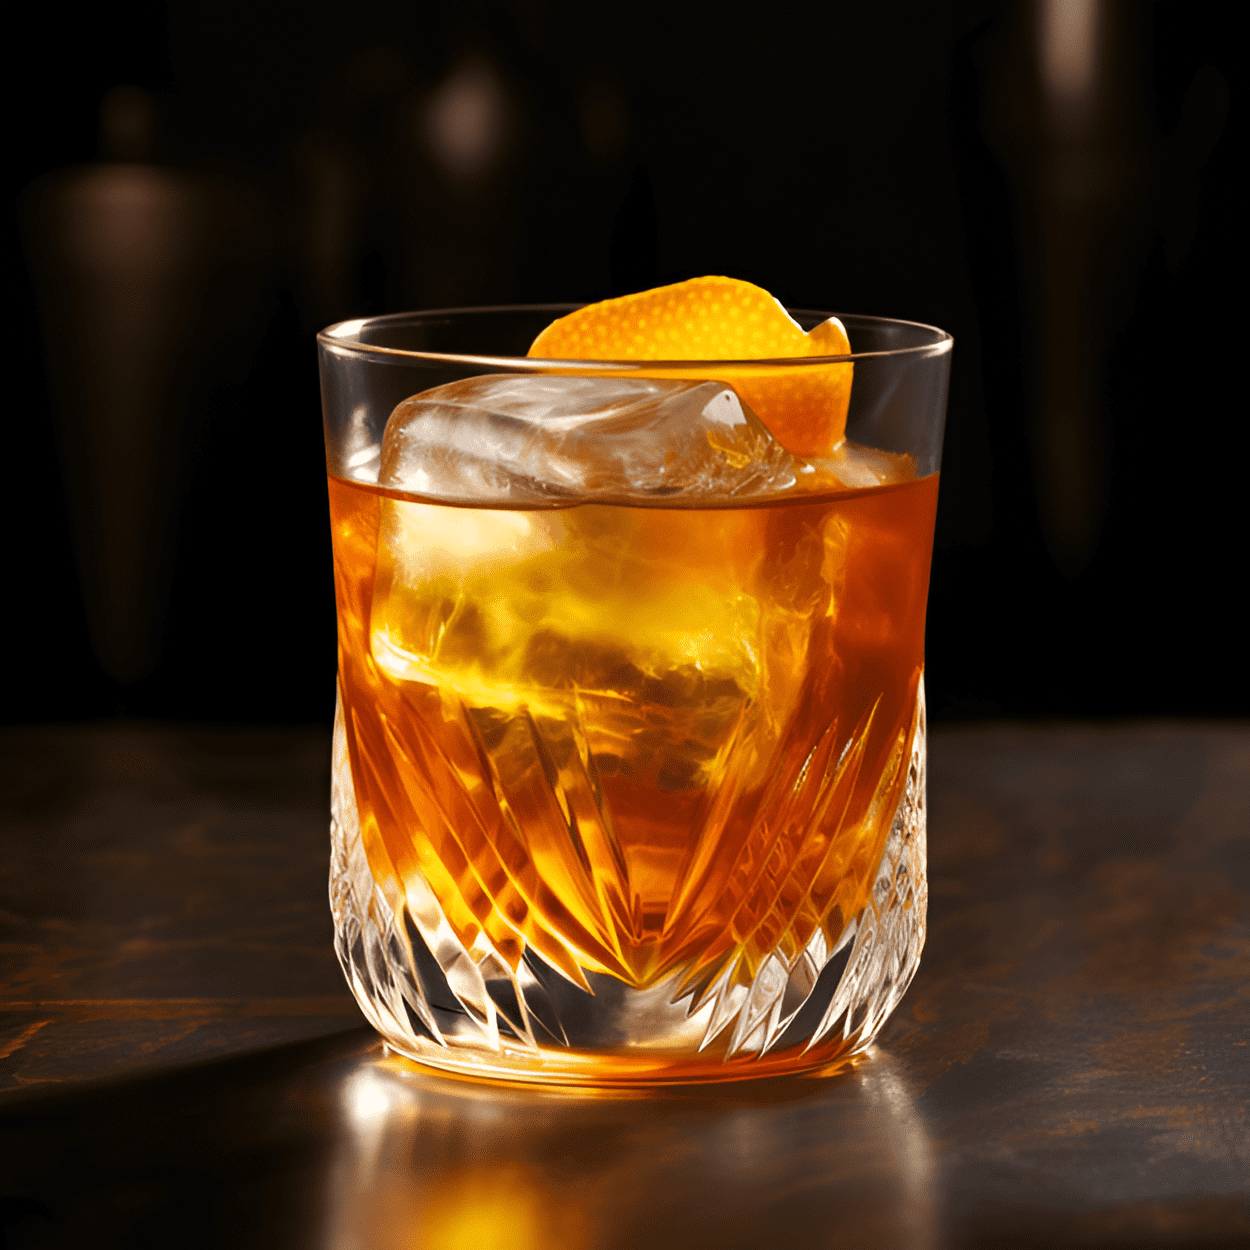 Stonewall Cocktail Recipe - The Stonewall cocktail is a strong, robust drink with a hint of sweetness. It has a rich, full-bodied flavor with a slight tanginess from the lemon juice. The bourbon gives it a deep, smoky undertone, while the maple syrup adds a subtle sweetness that balances out the strength of the other ingredients.